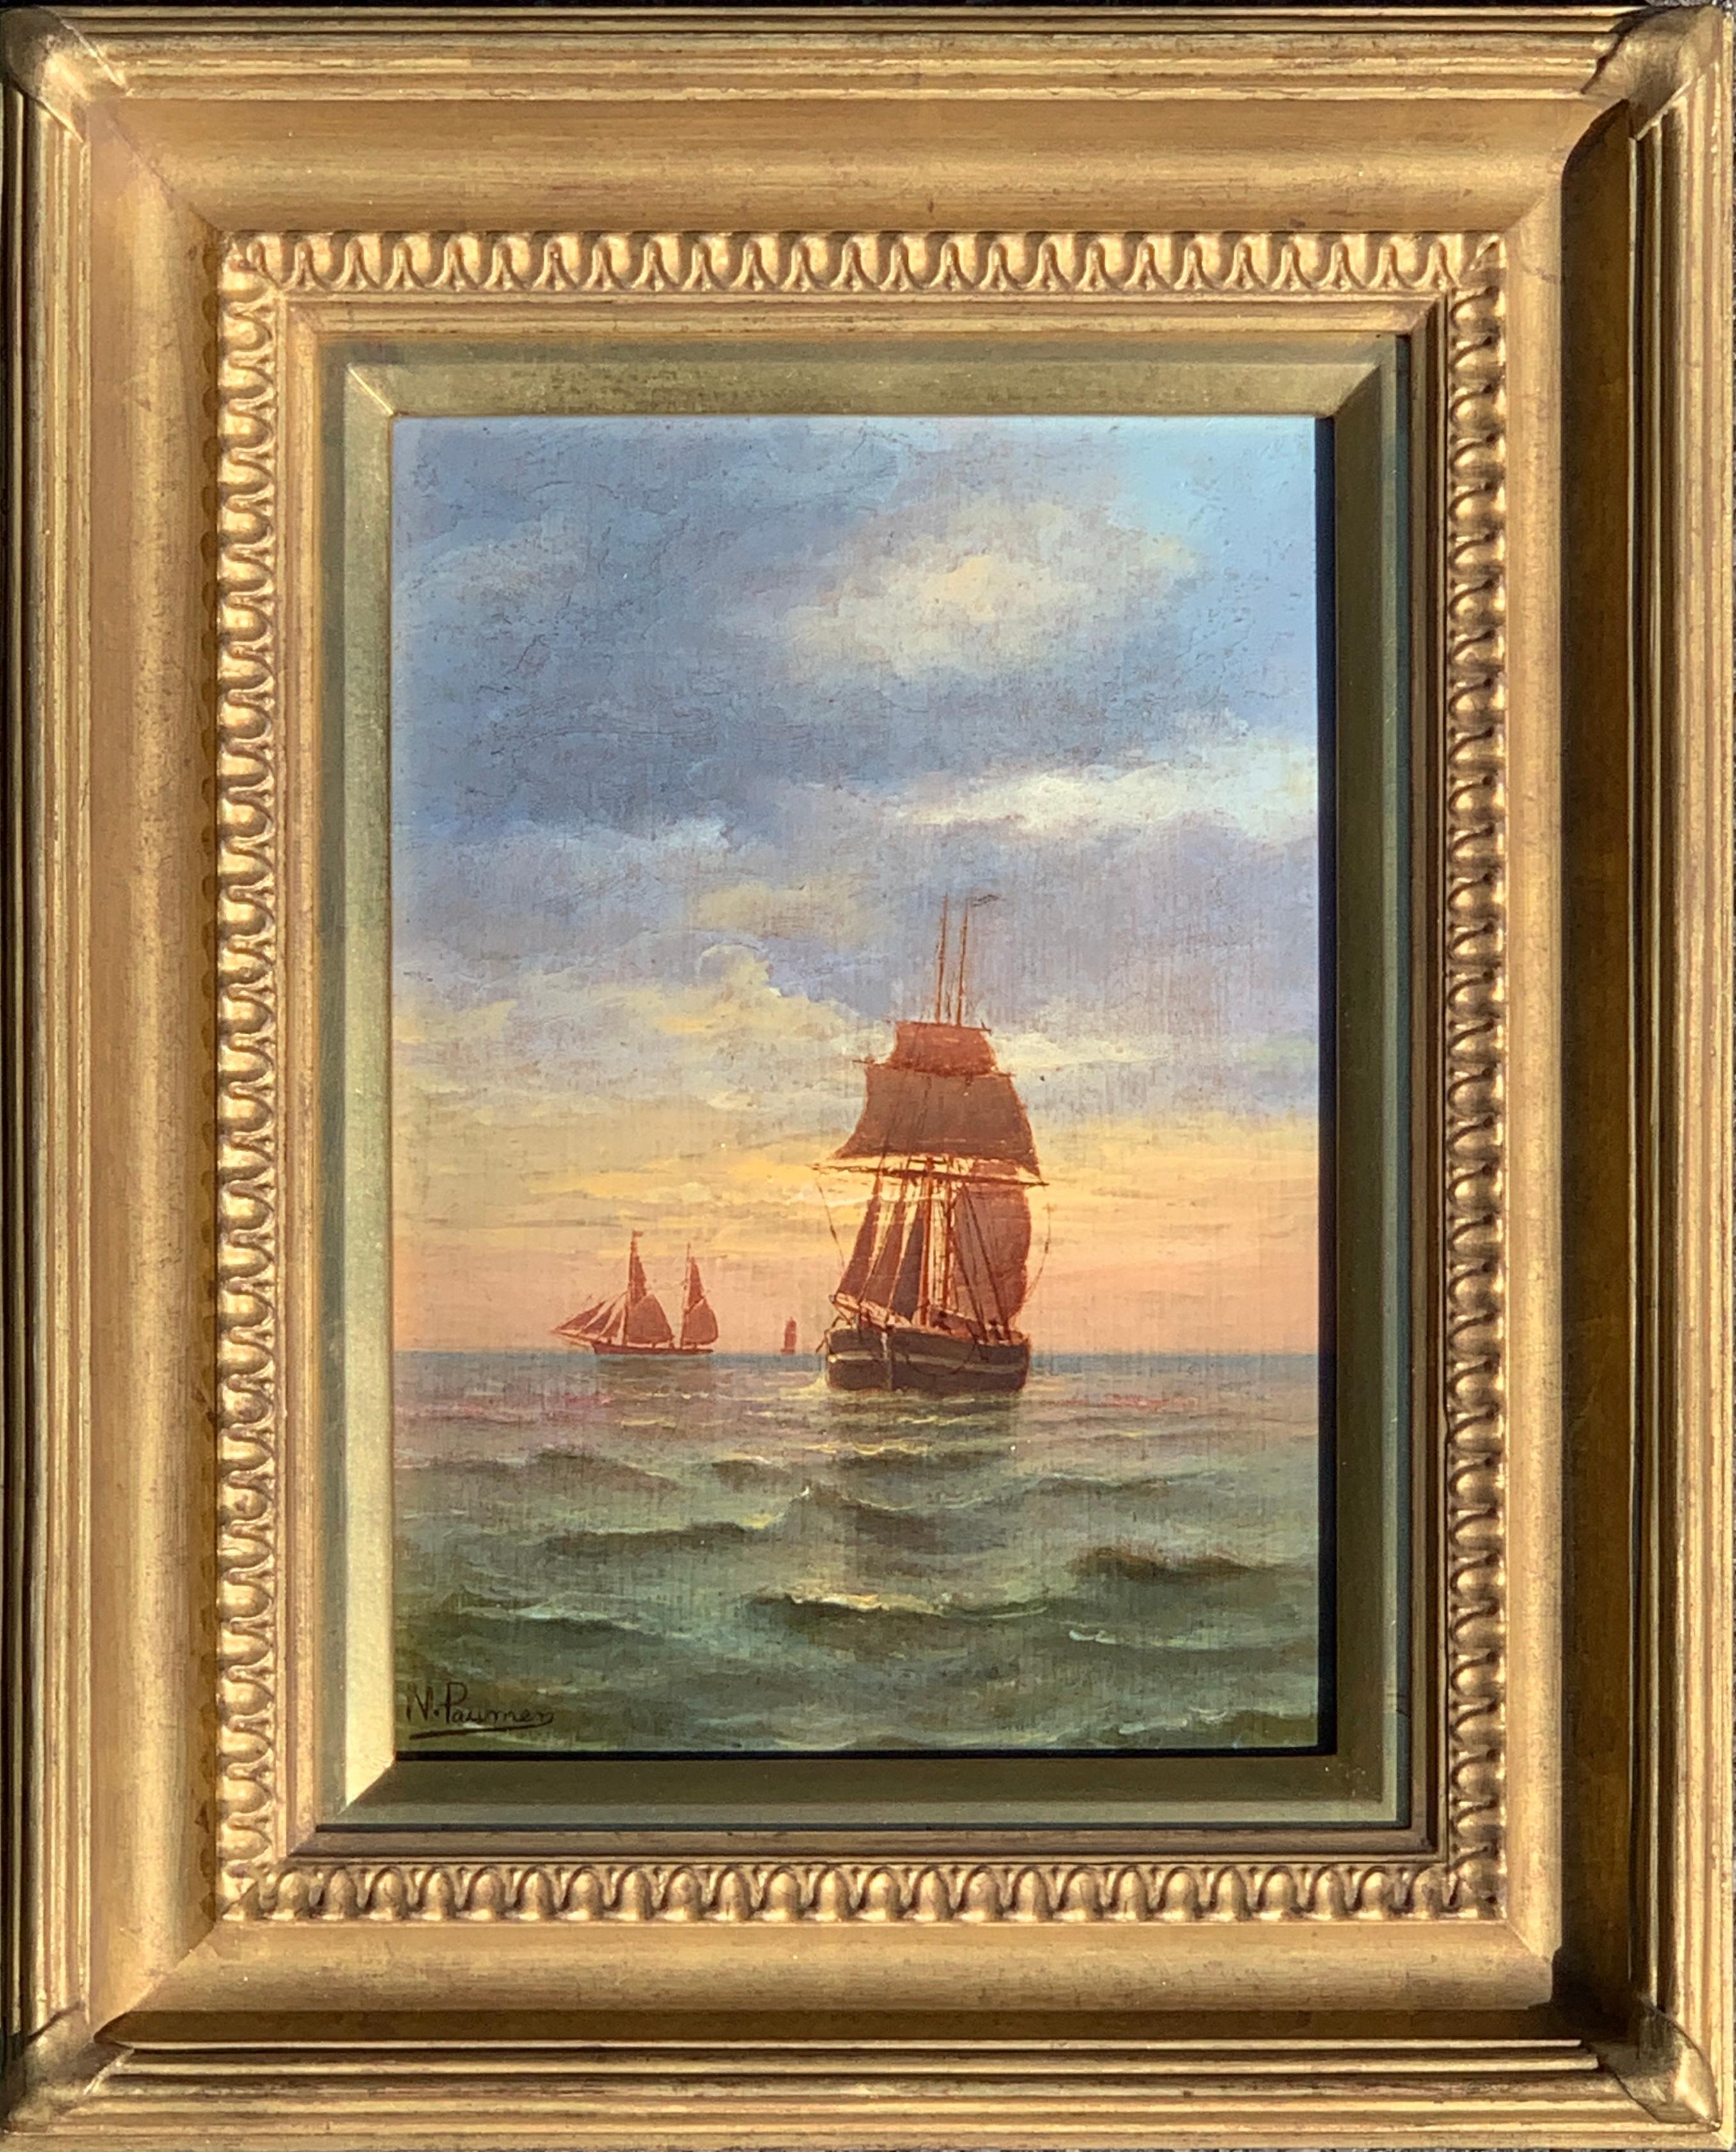 N. Pauman Figurative Painting - French 19th century Victorian Shipping scene at Sunset